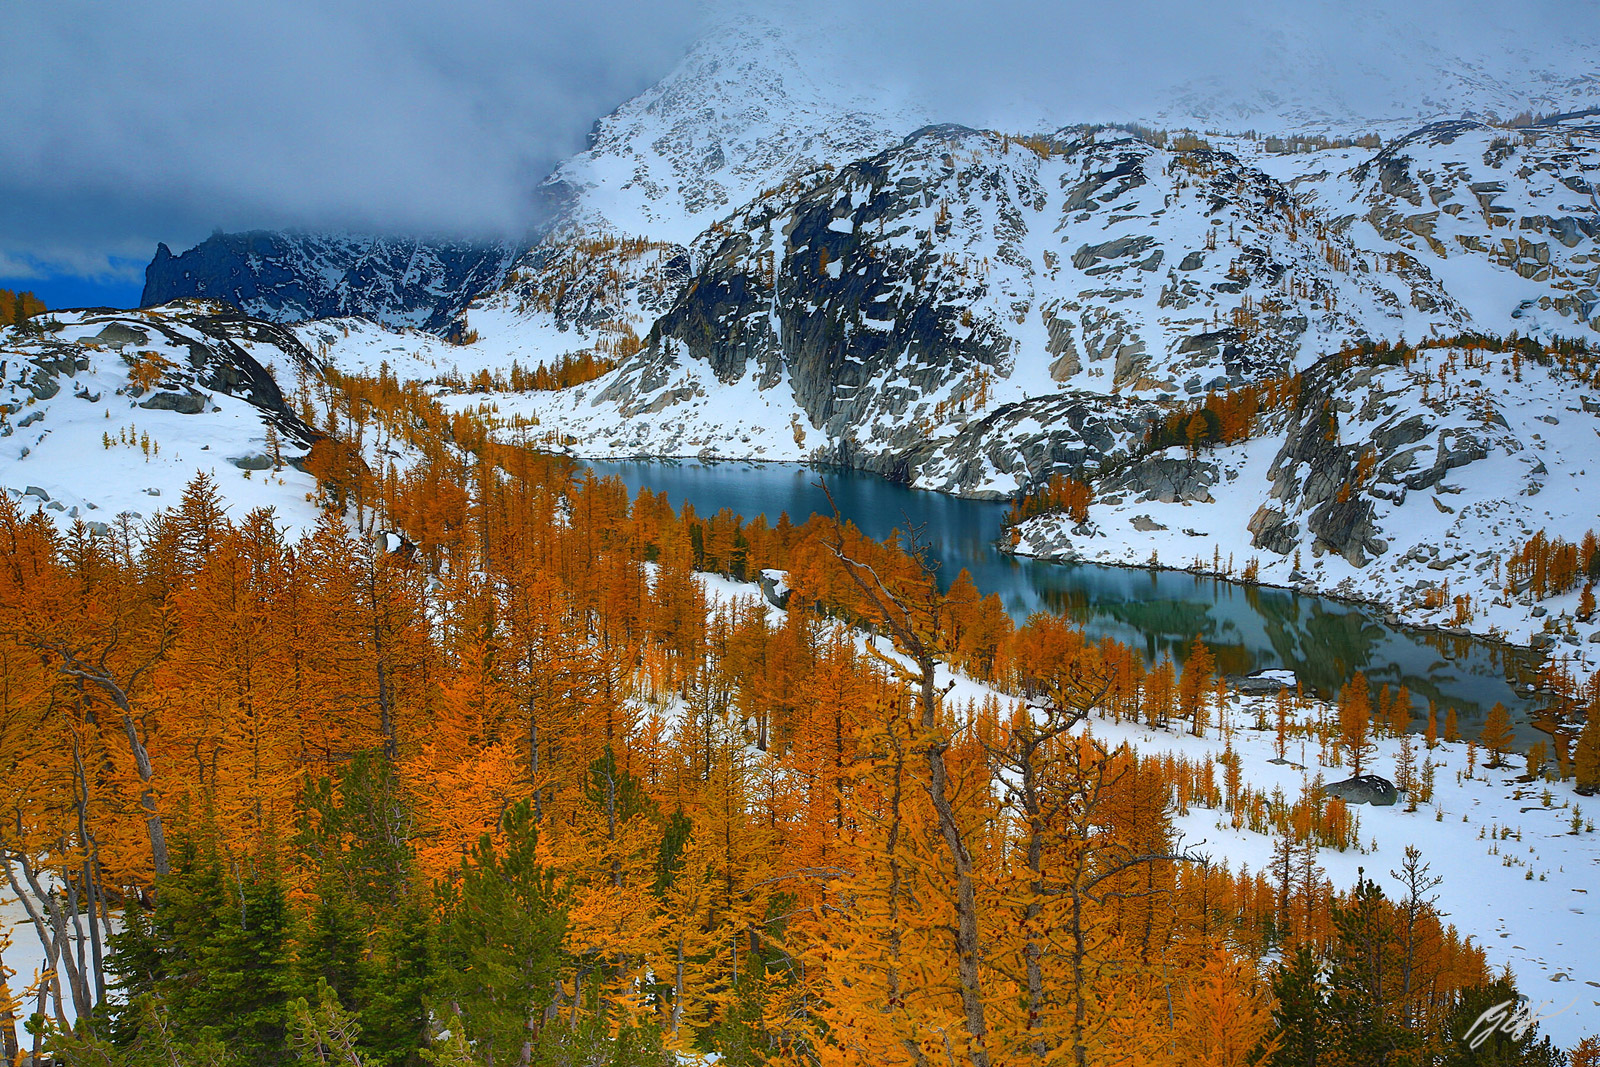 Golden Larch and Little Anna Purna with Perfection Lake in the Enchantments in the Alpine Lakes Wilderness in Washington